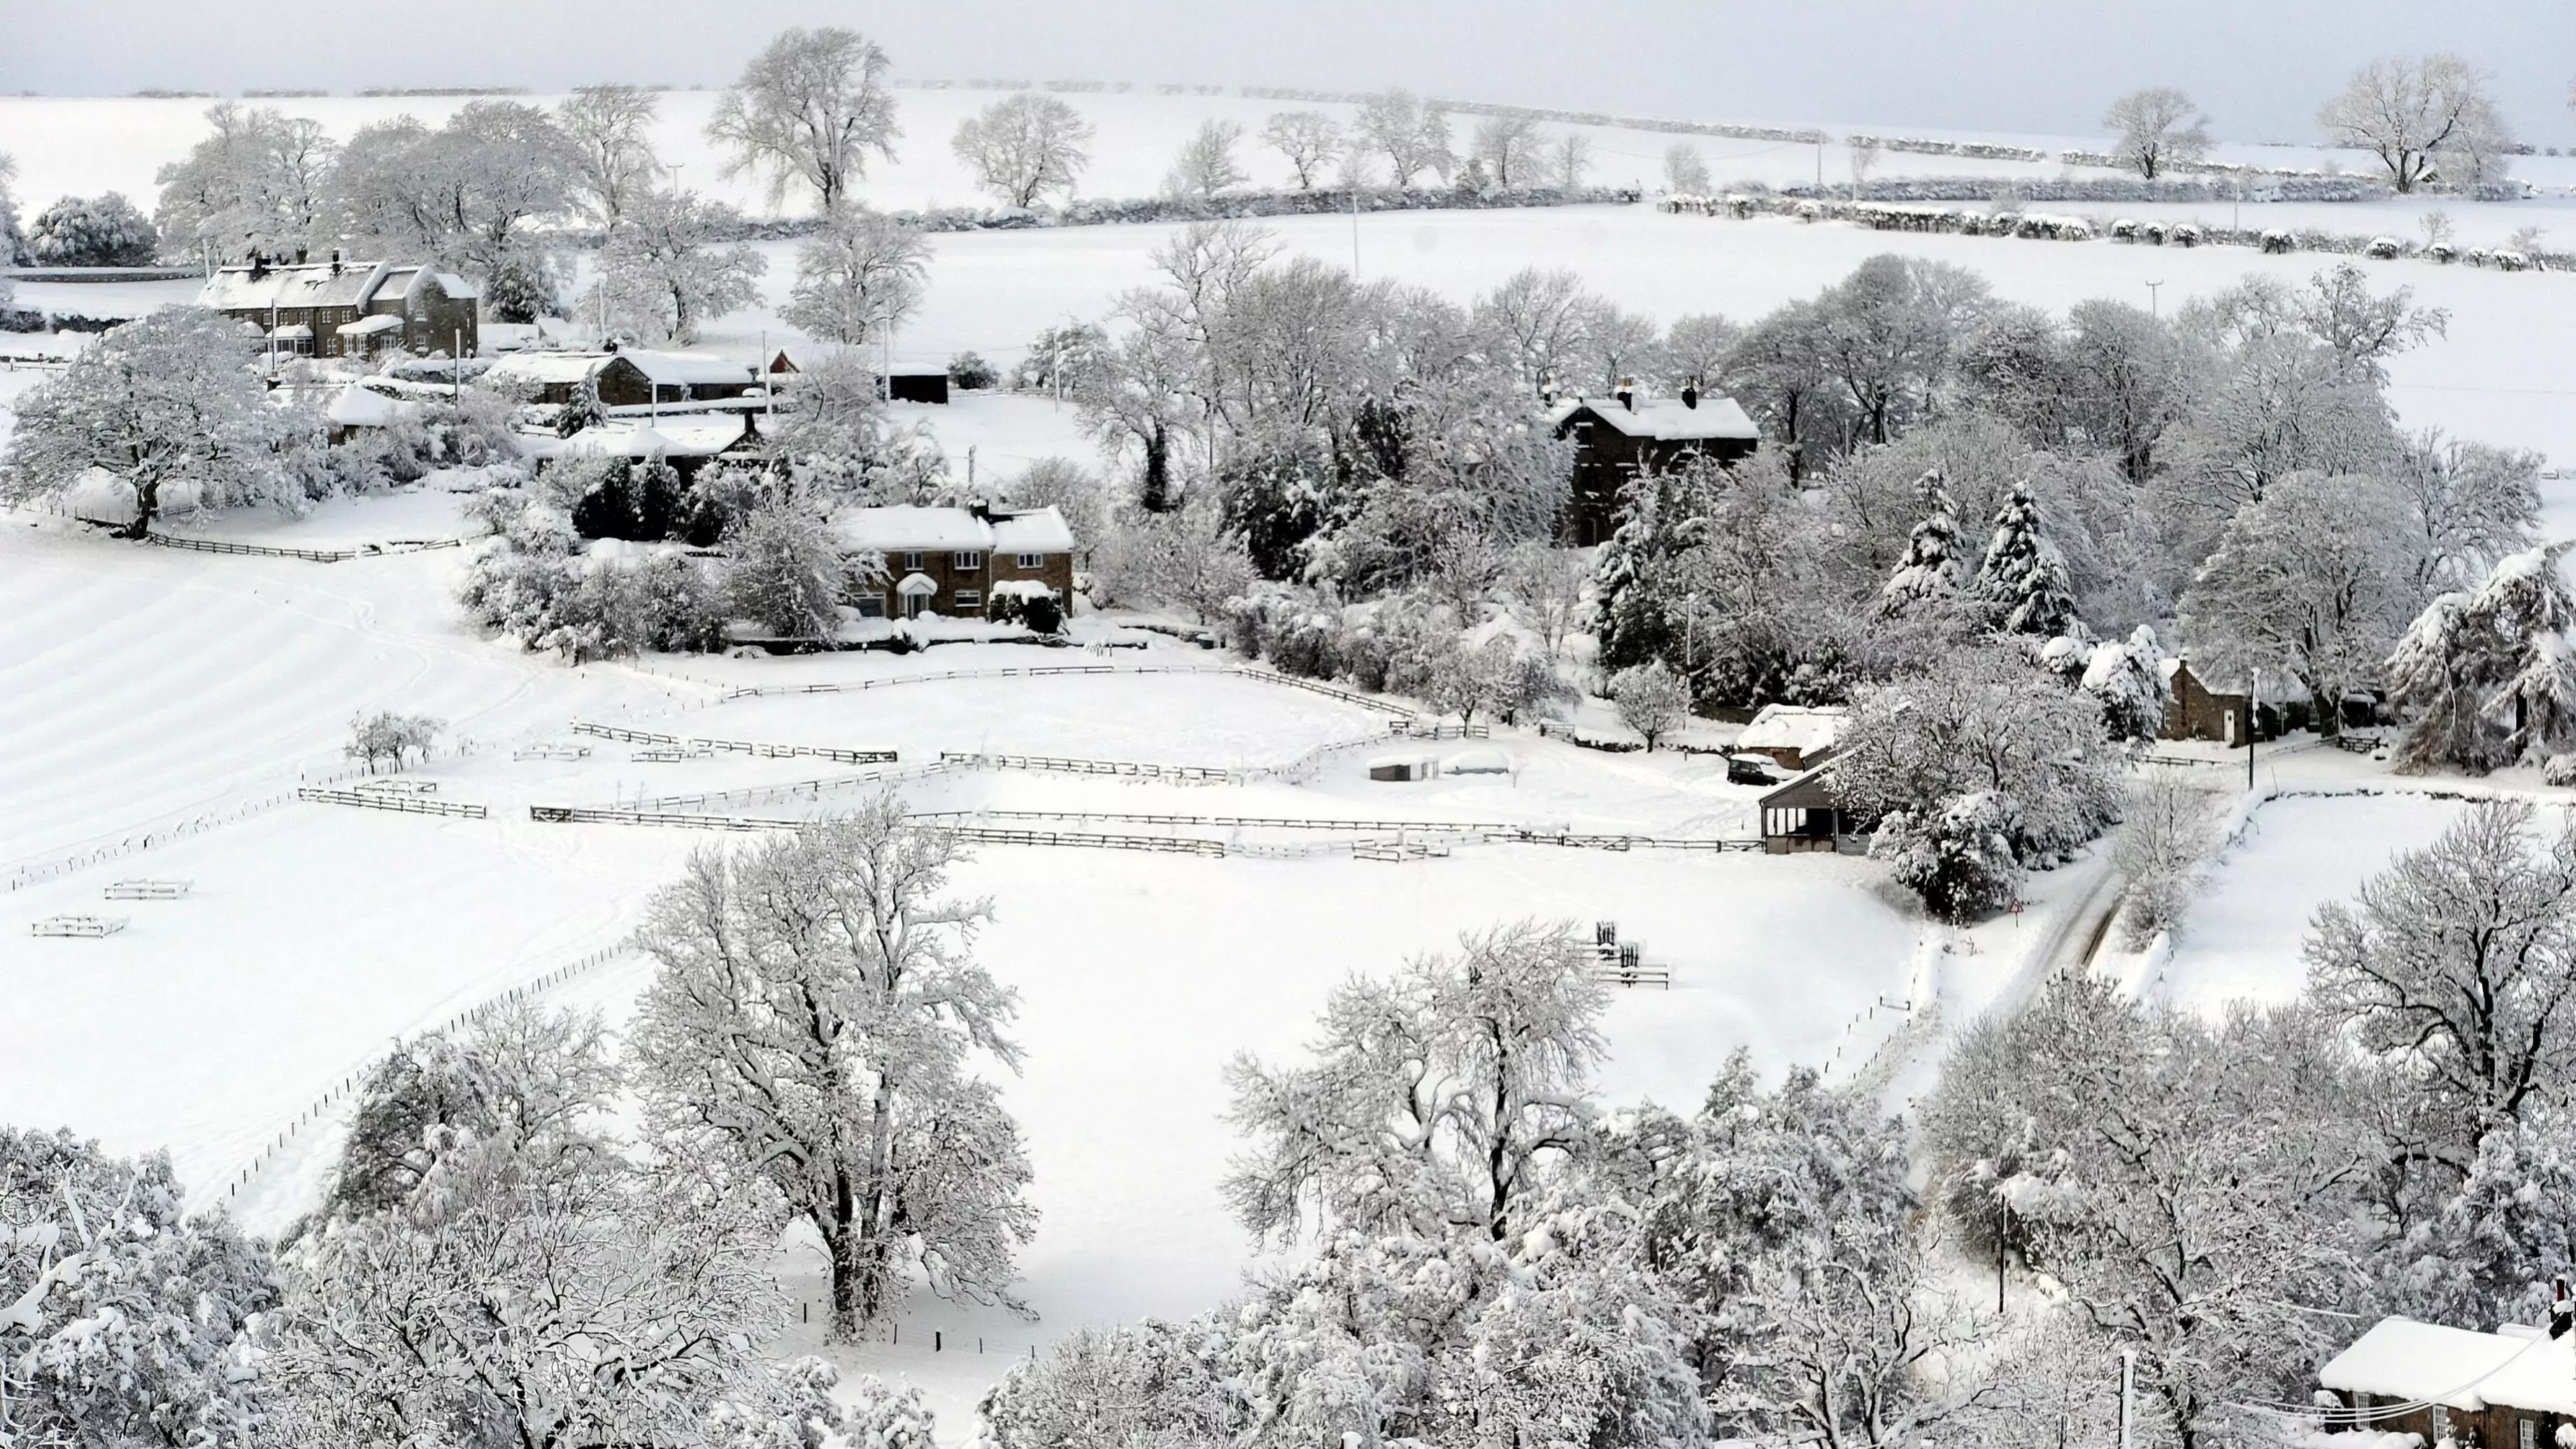 Met Office Issues Weather Warning With Snow Forecast Across The UK